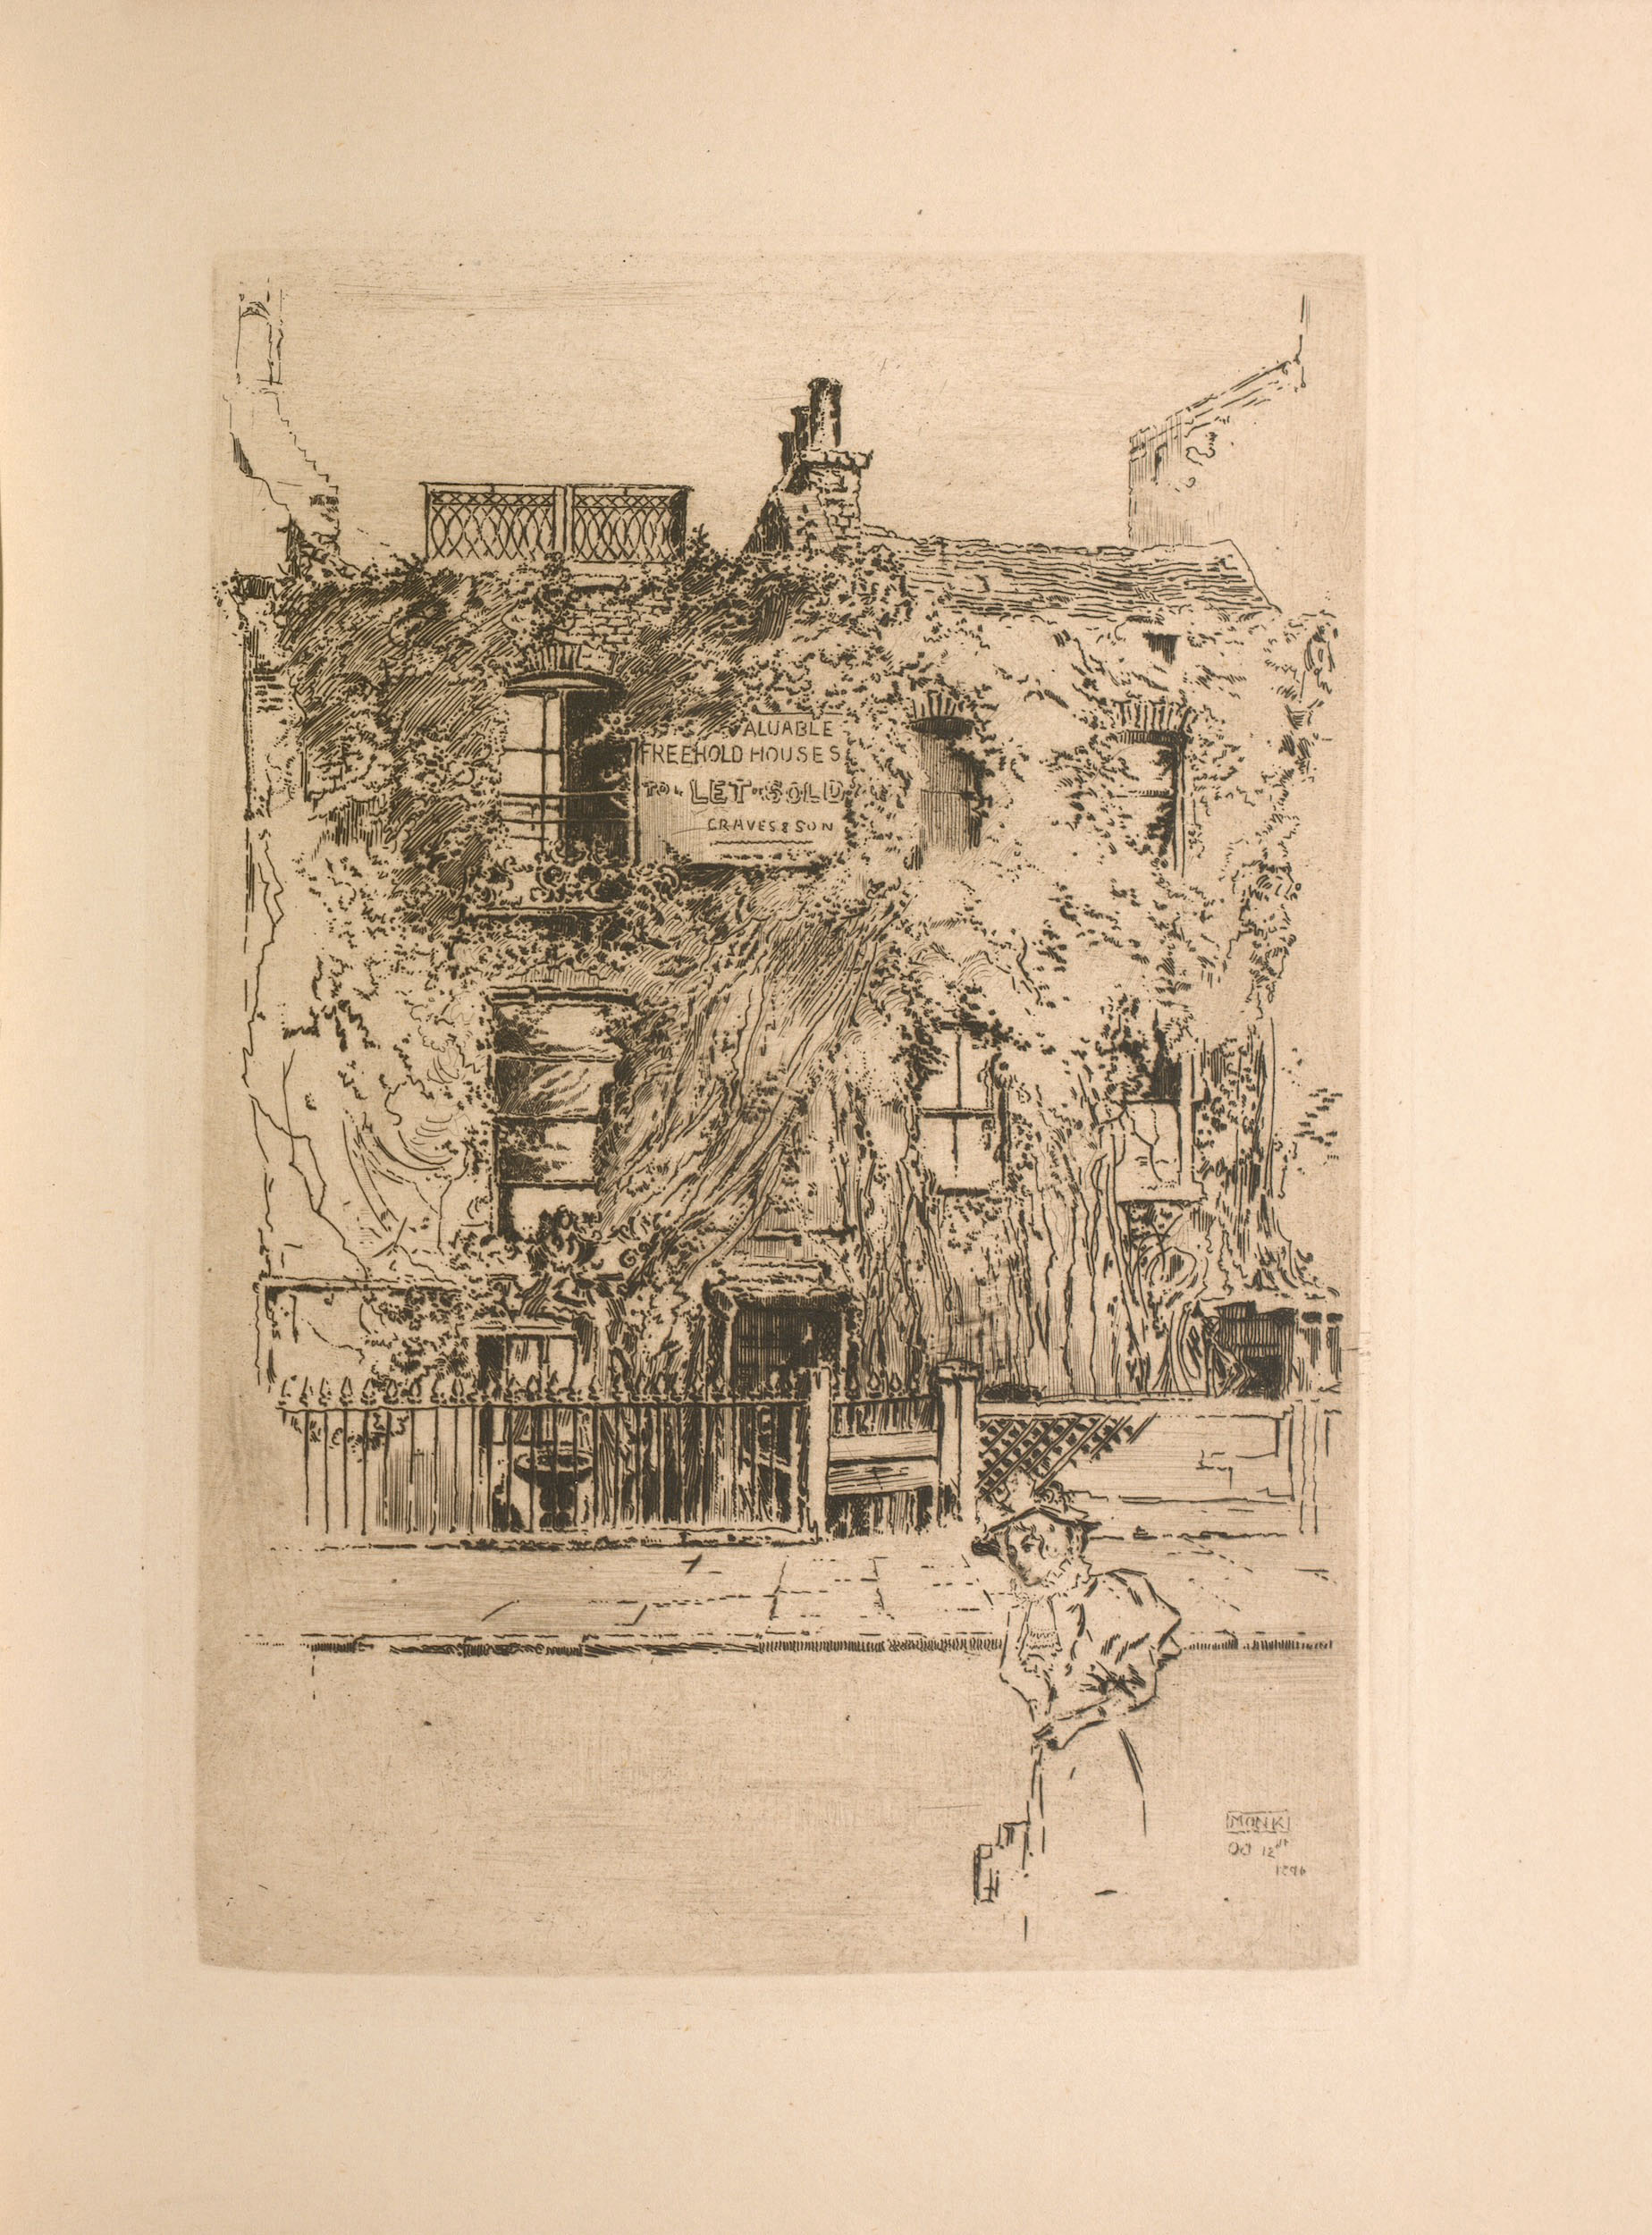 The etching is centered on the page and is printed in sepia tones. A large house enshrouded in moss and shrubs is depicted on the other side of a residential street. The house has seven windows: three on the first floor, three on the second floor, and one in the lower level on the left of the building. On the top floor of the house there is a large sign with the words: “VALUABLE FREEHOLD HOUSES TO BE LET OR SOLD – CRAVES & SON.” A small chimney protrudes from the top center of the house. Wrought iron fencing separates the property from the sidewalk; a gateway leads to the front door at the center of the house. In the bottom right foreground, woman in a wide-brimmed hat, full-length dress, and jacket is walking on the street in front of house. An inscription “Monk Oct 12th 1896” is located in the bottom right corner of the image.